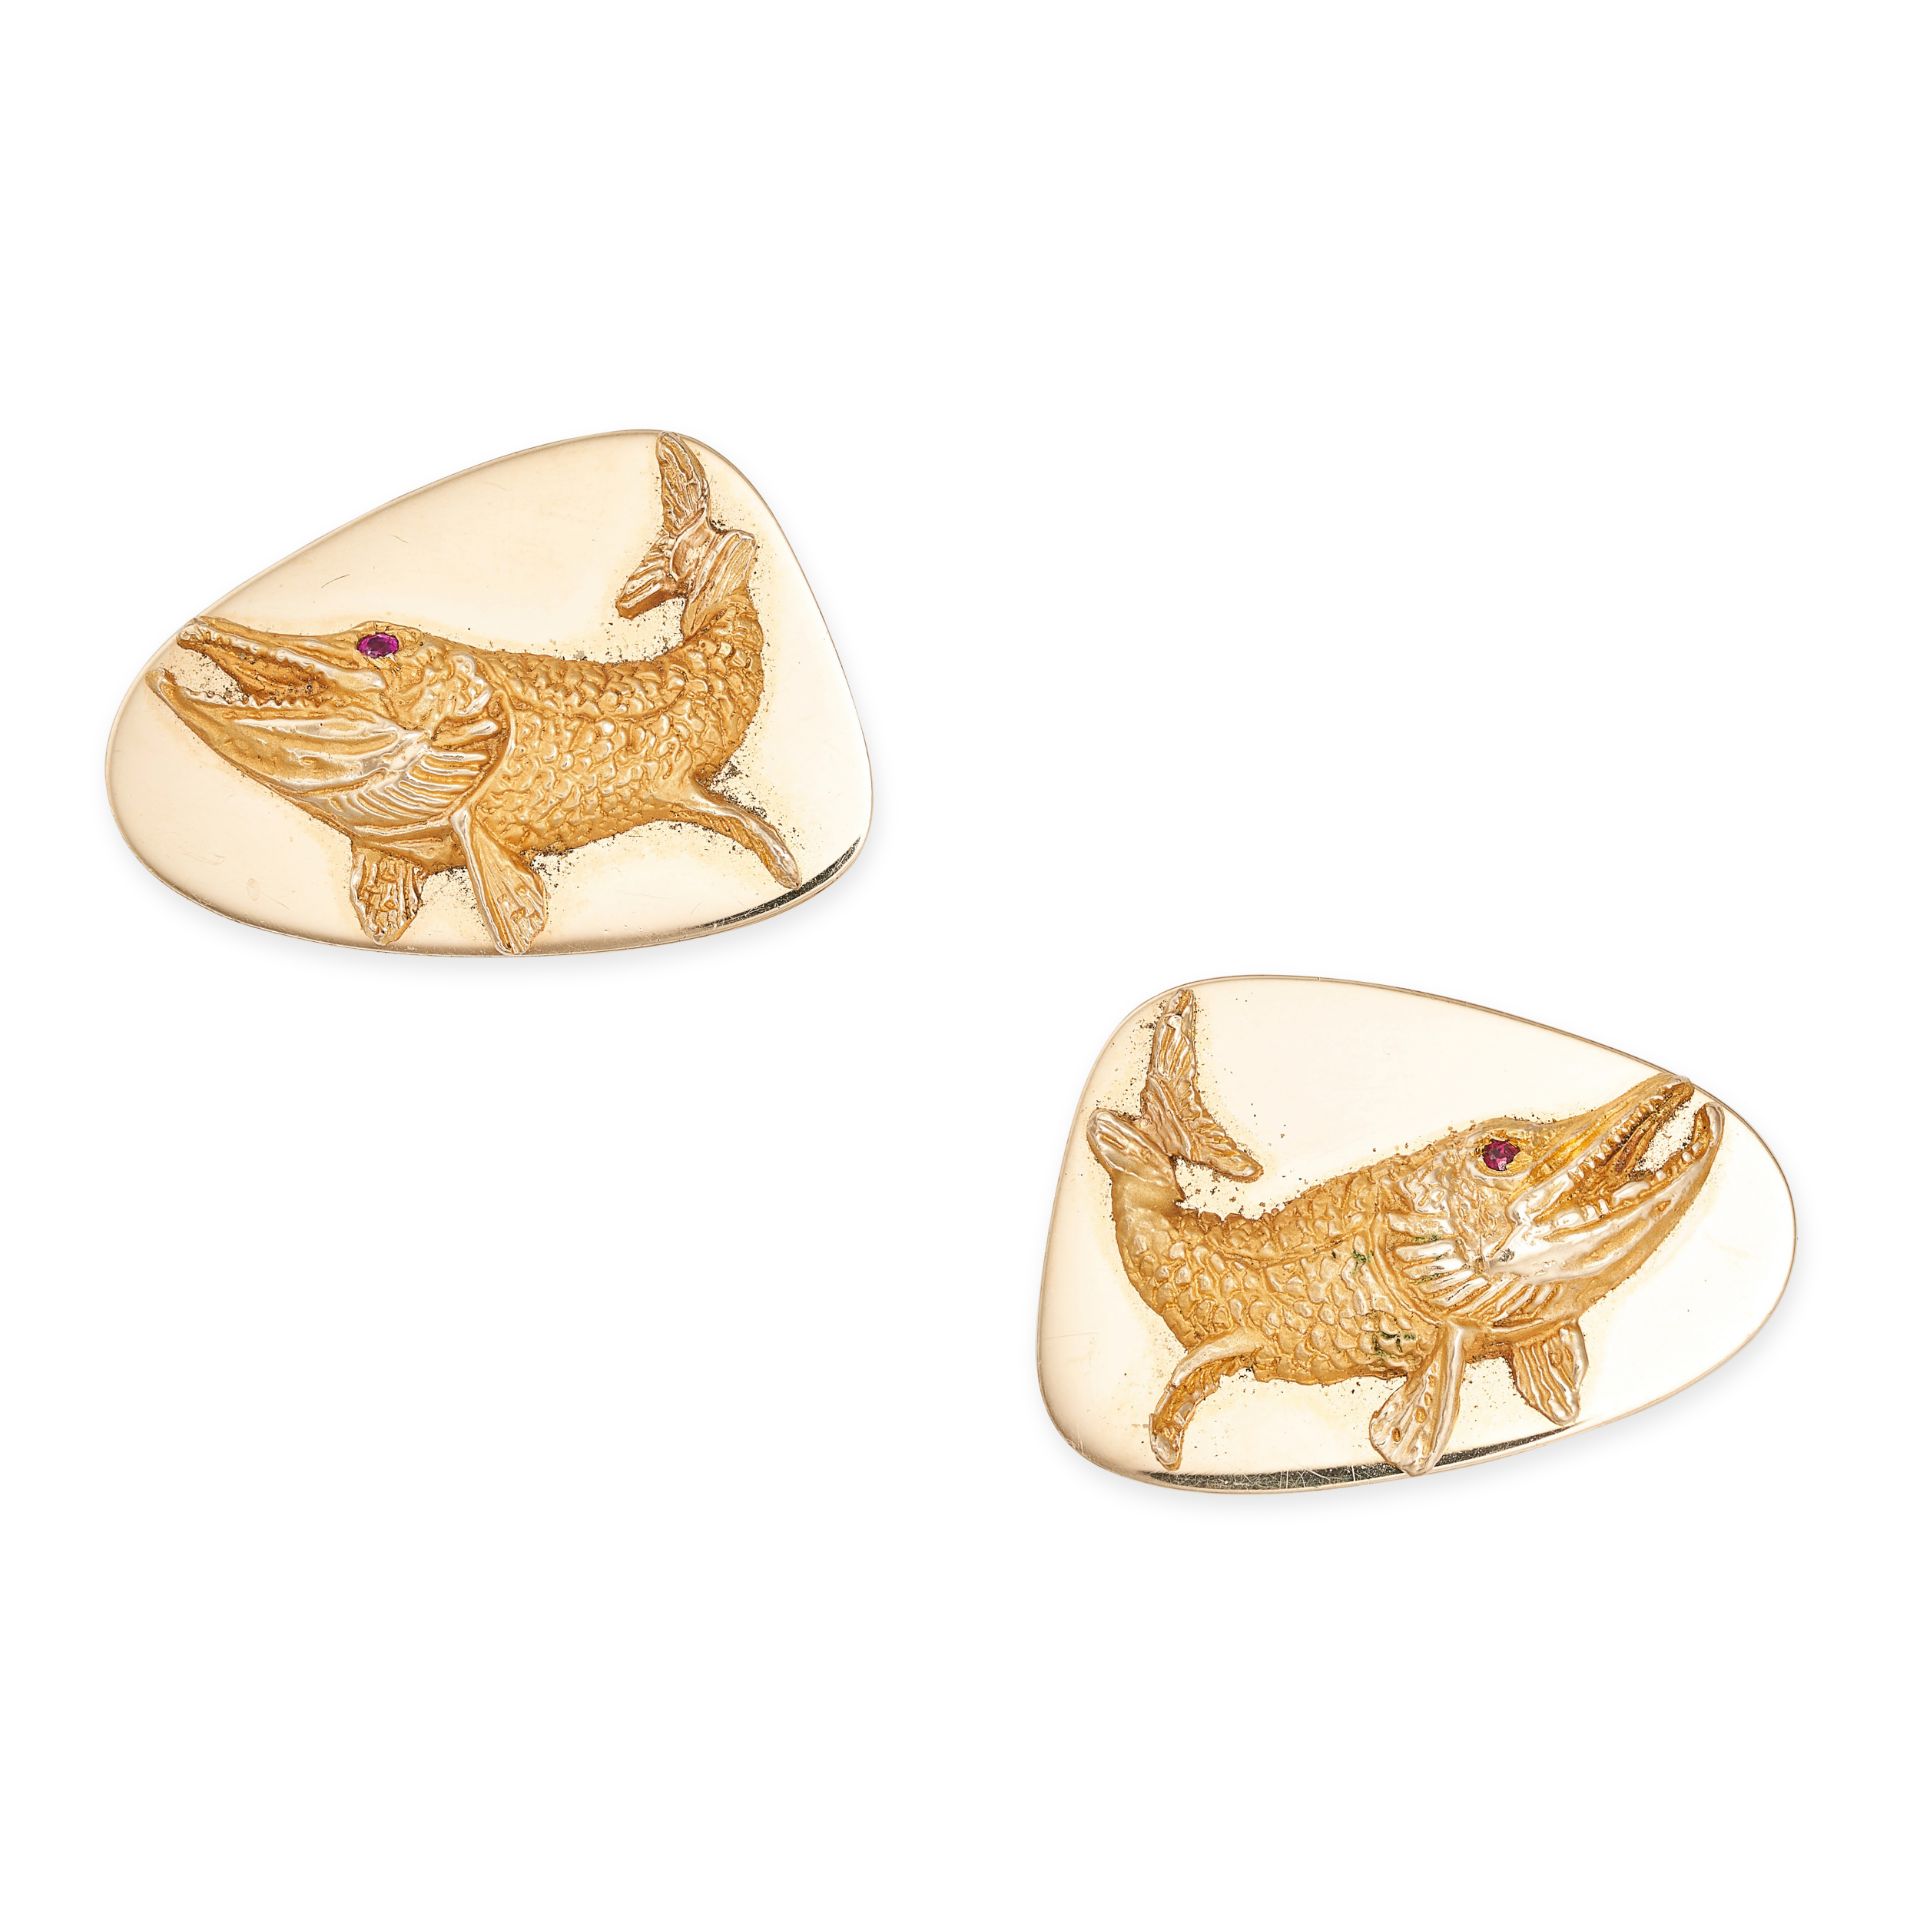 TIFFANY & CO., A PAIR OF VINTAGE RUBY FISH CUFFLINKS in 14ct yellow gold, each with a textured fi...